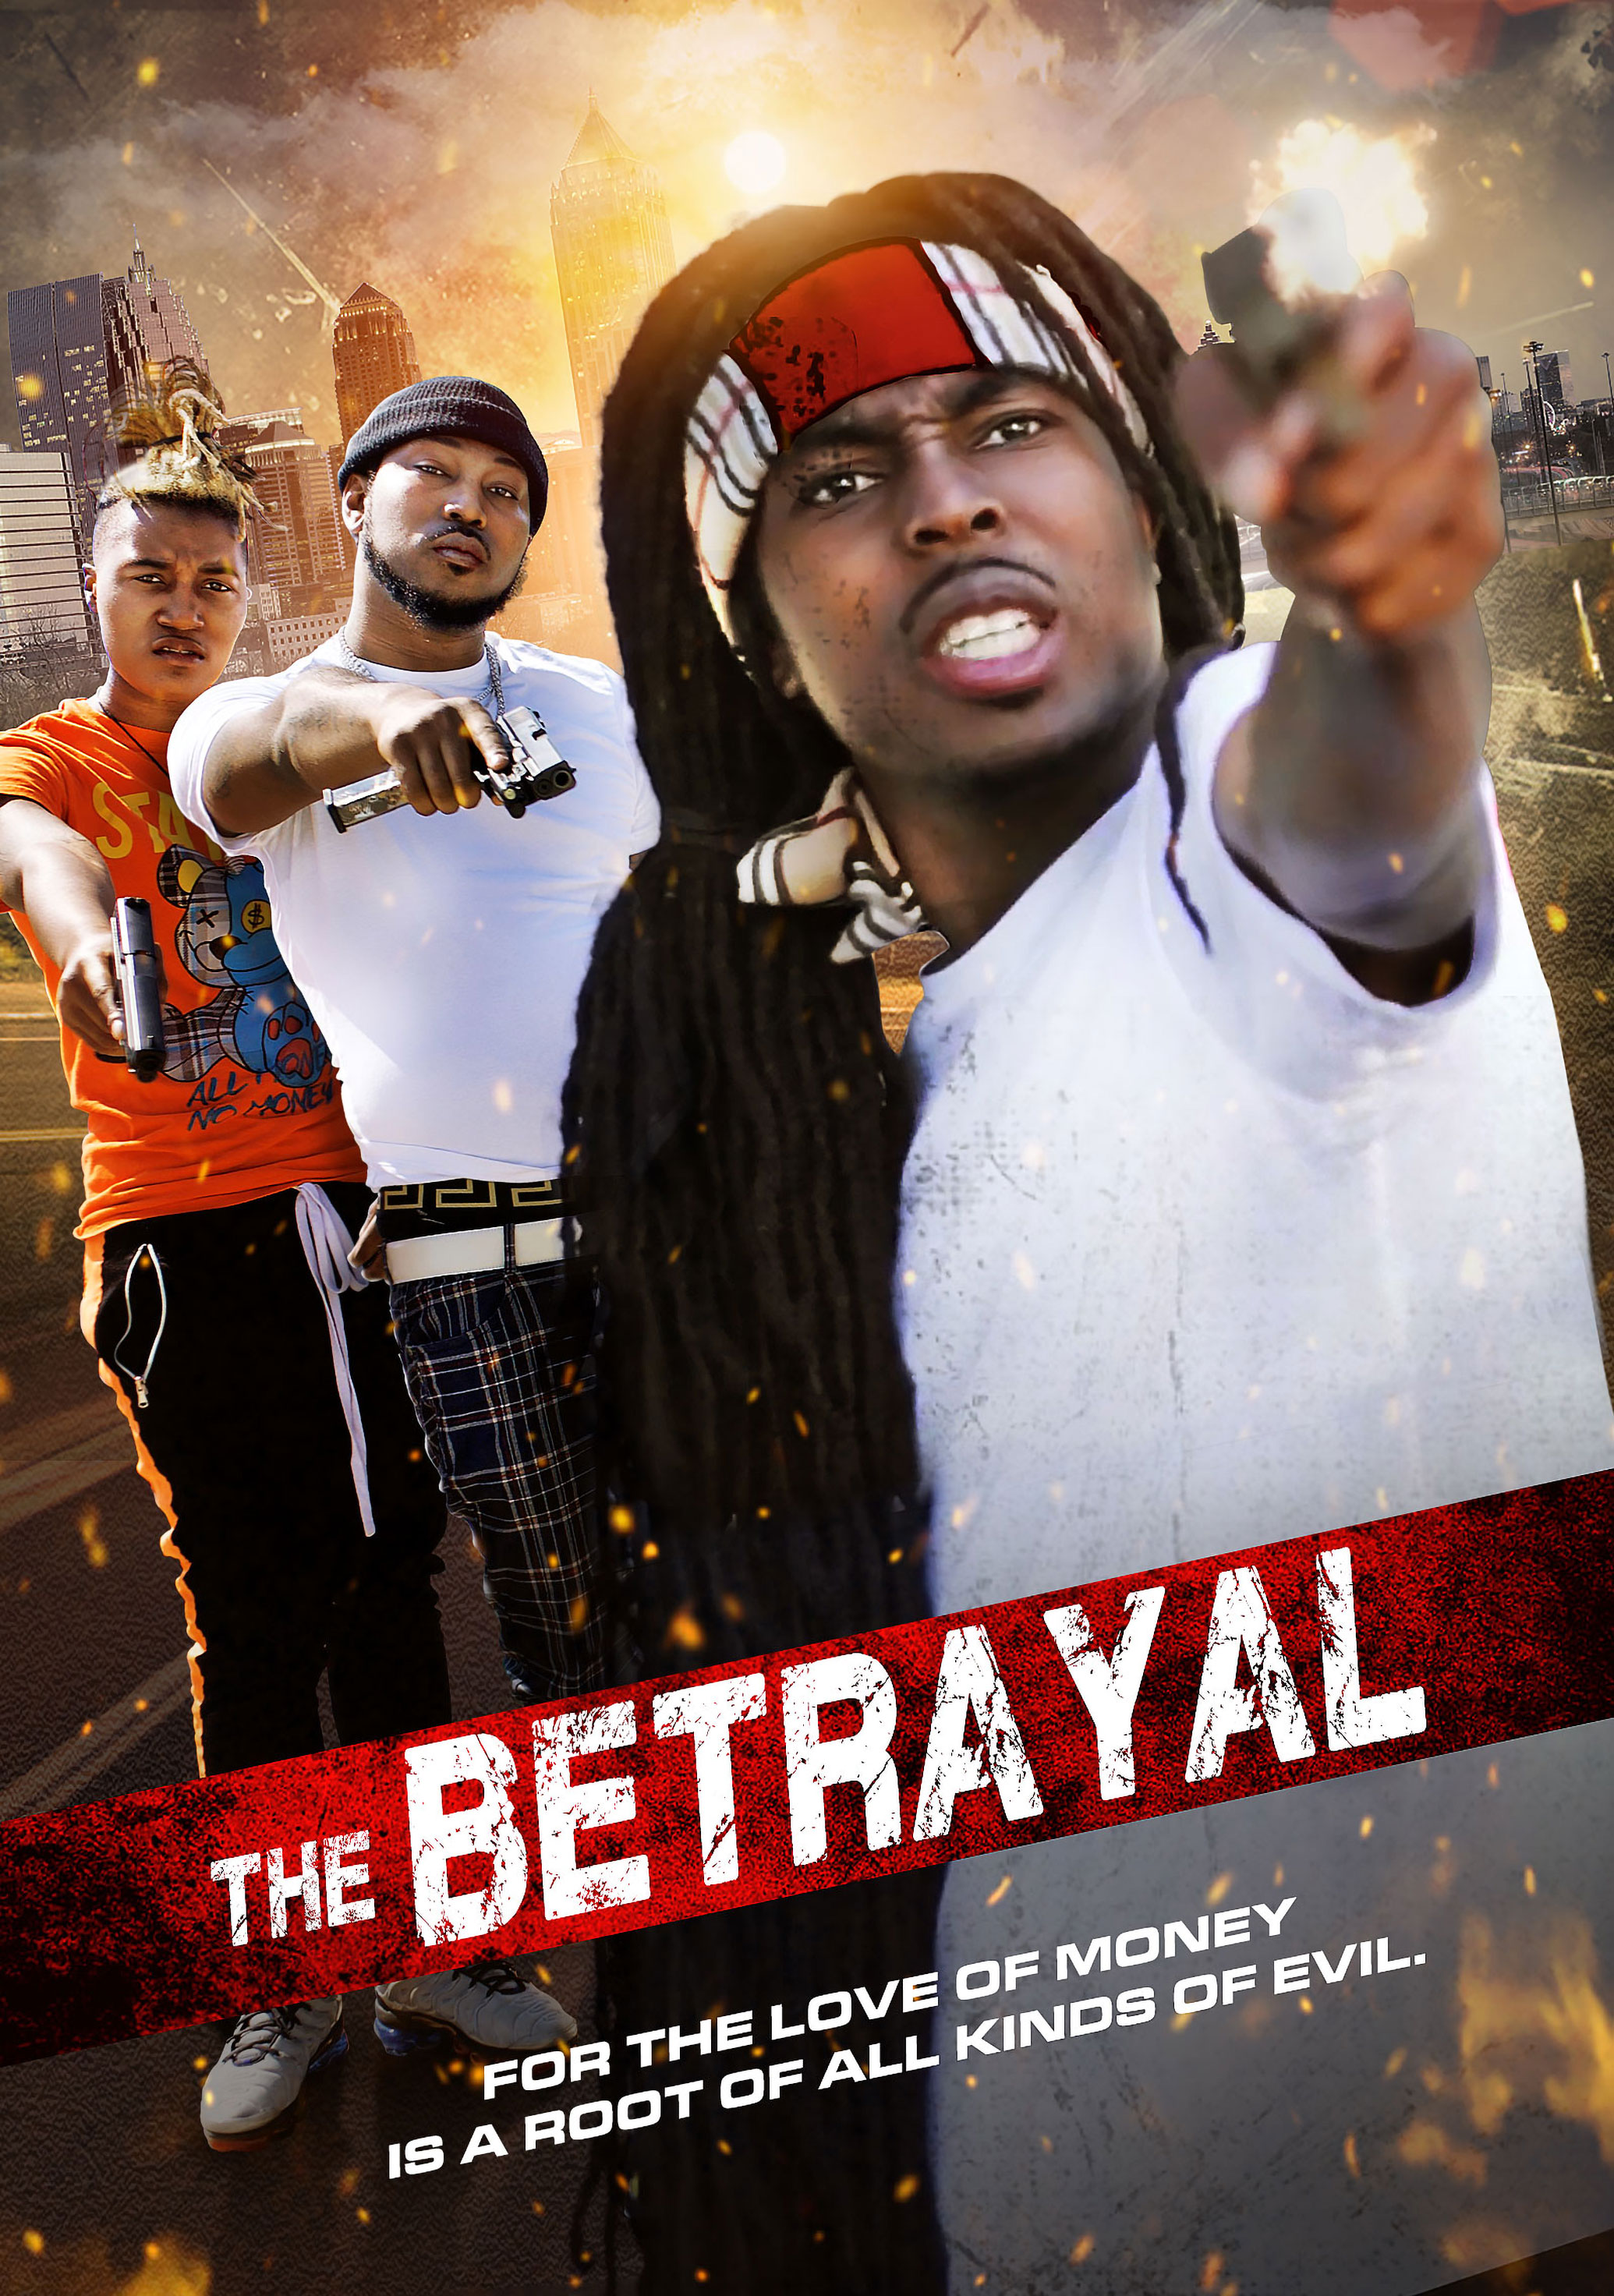 The Betrayal (2019) Action, Directed By Shadeiah Henderson